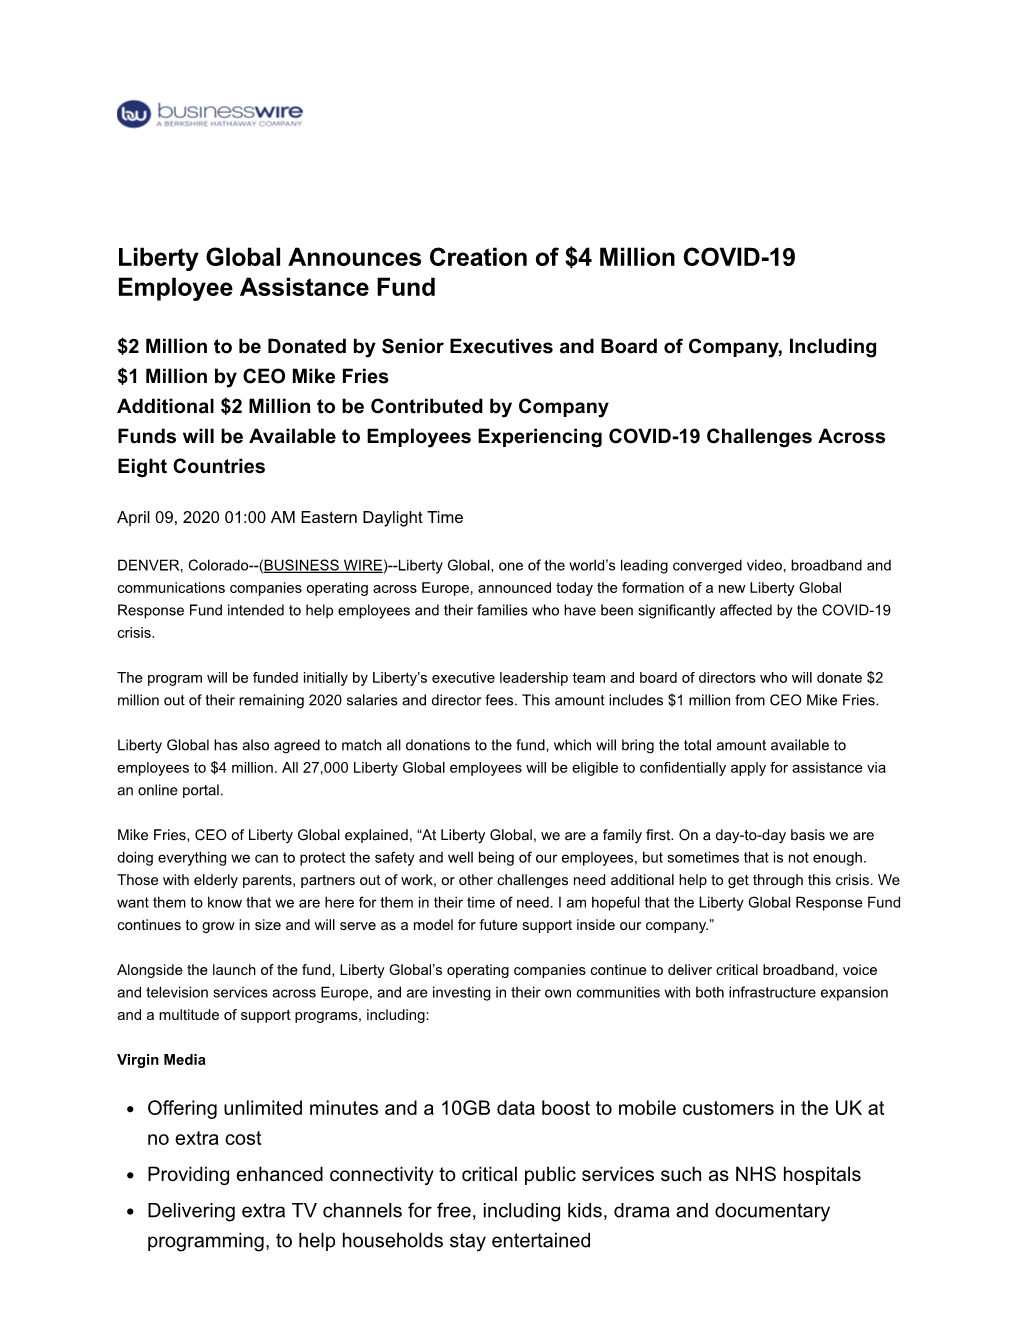 Liberty Global Announces Creation of $4 Million COVID-19 Employee Assistance Fund